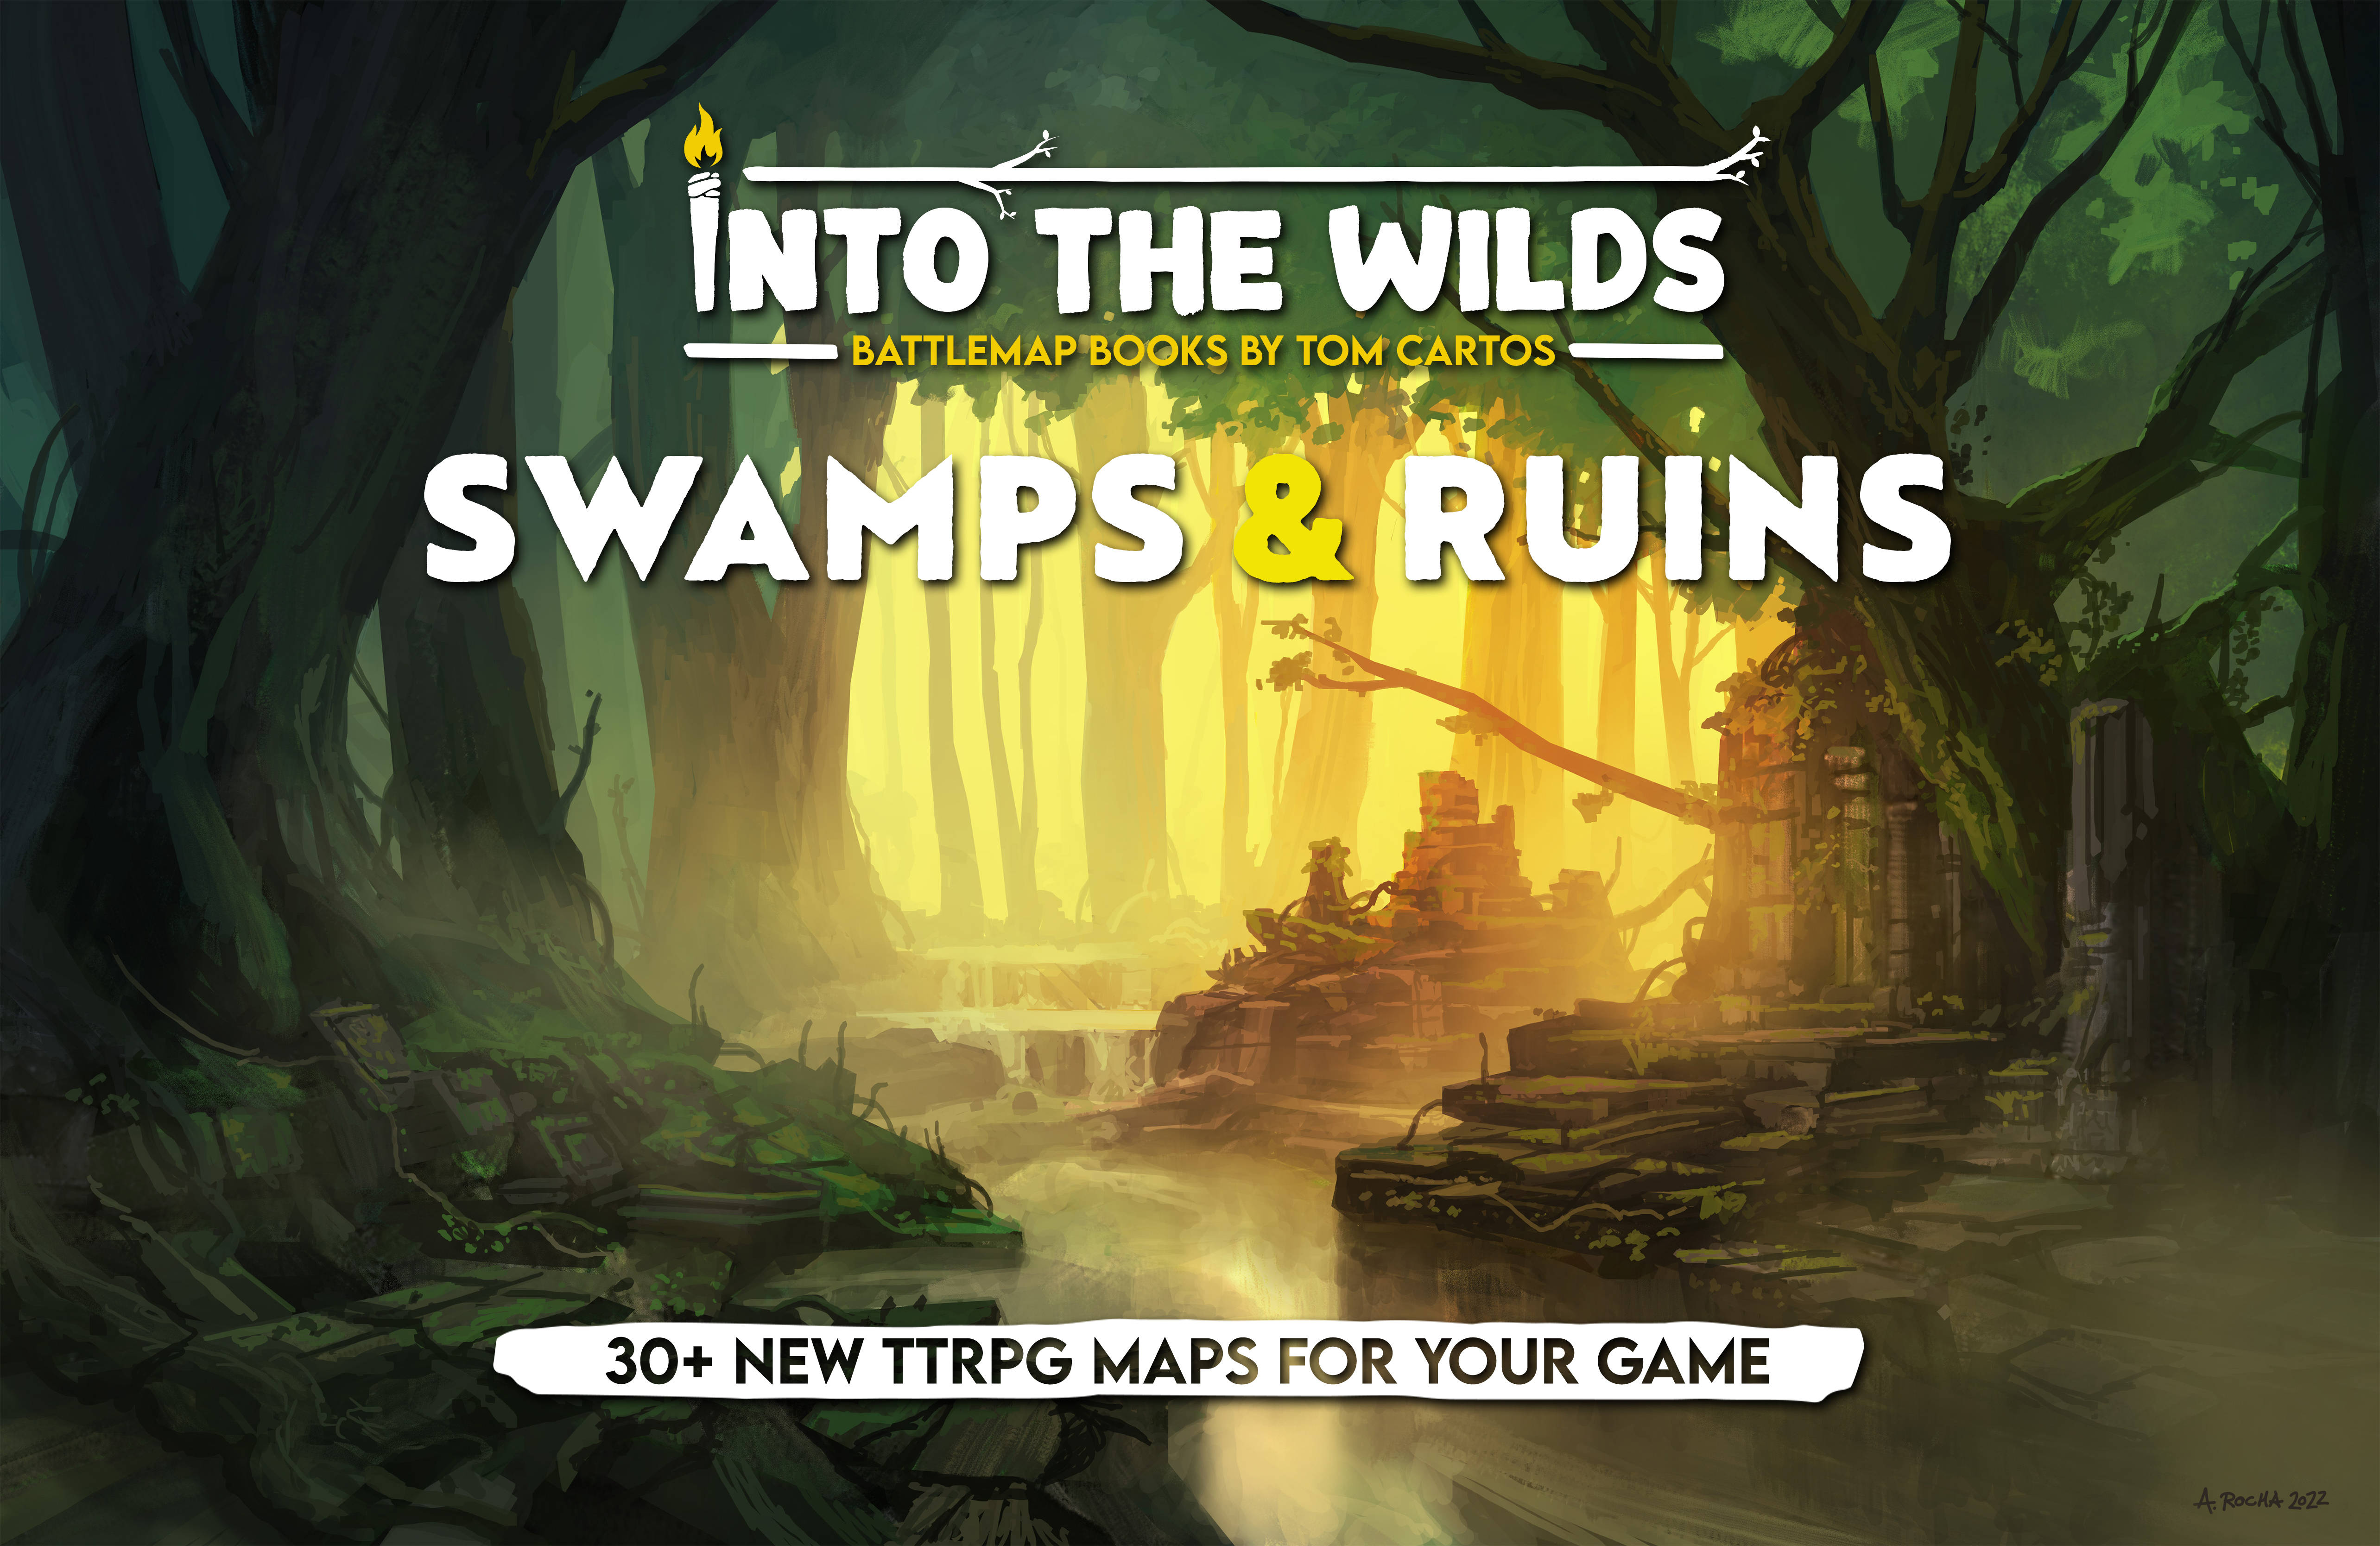 Into the Wilds Battlemap Books: Swamps and Ruins 